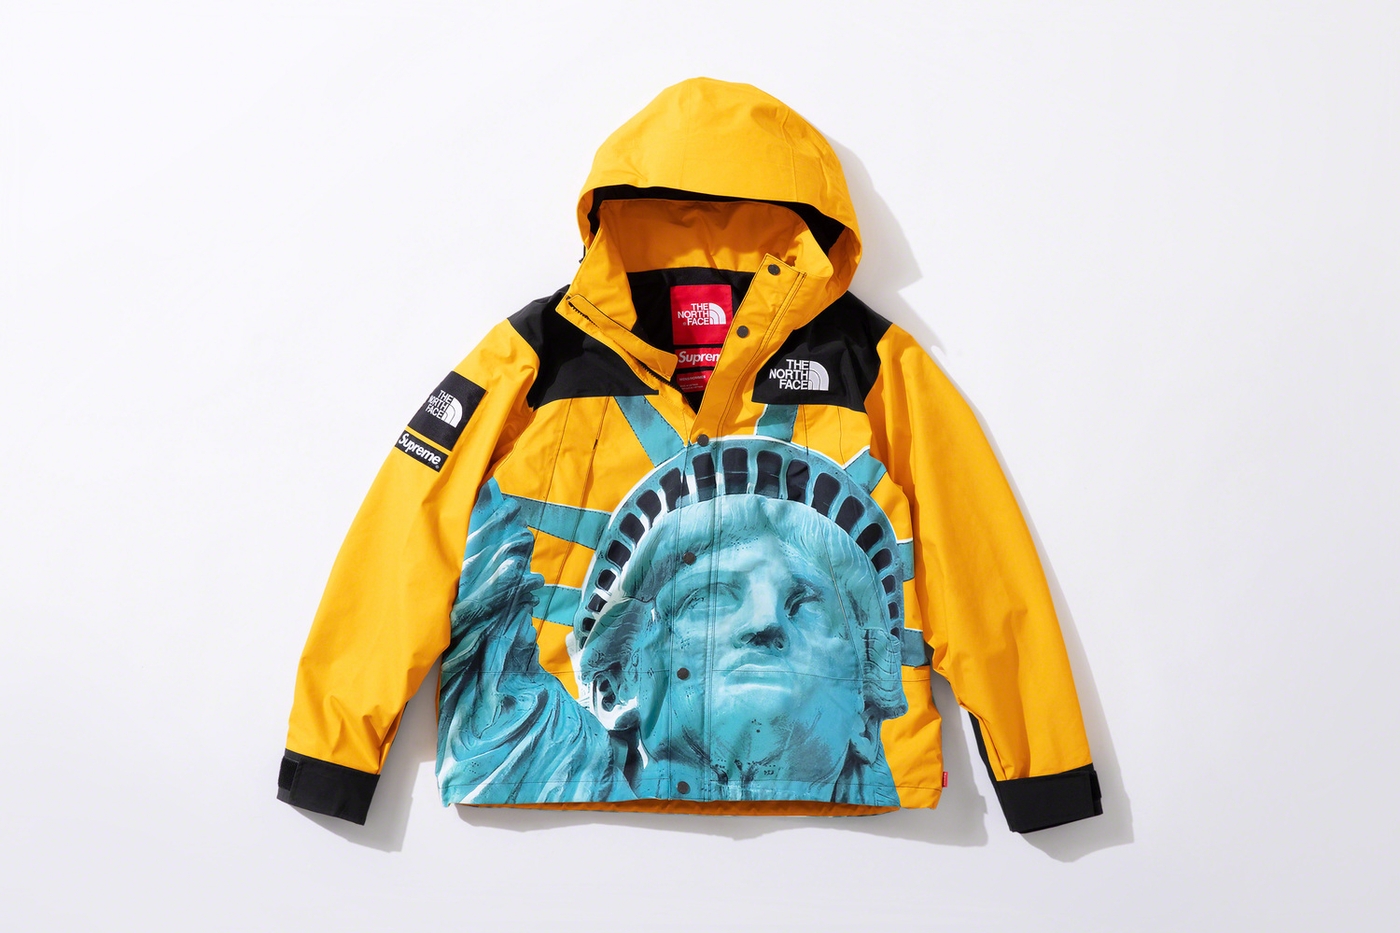 Statue of Liberty Mountain Jacket with packable hood. (18/29)